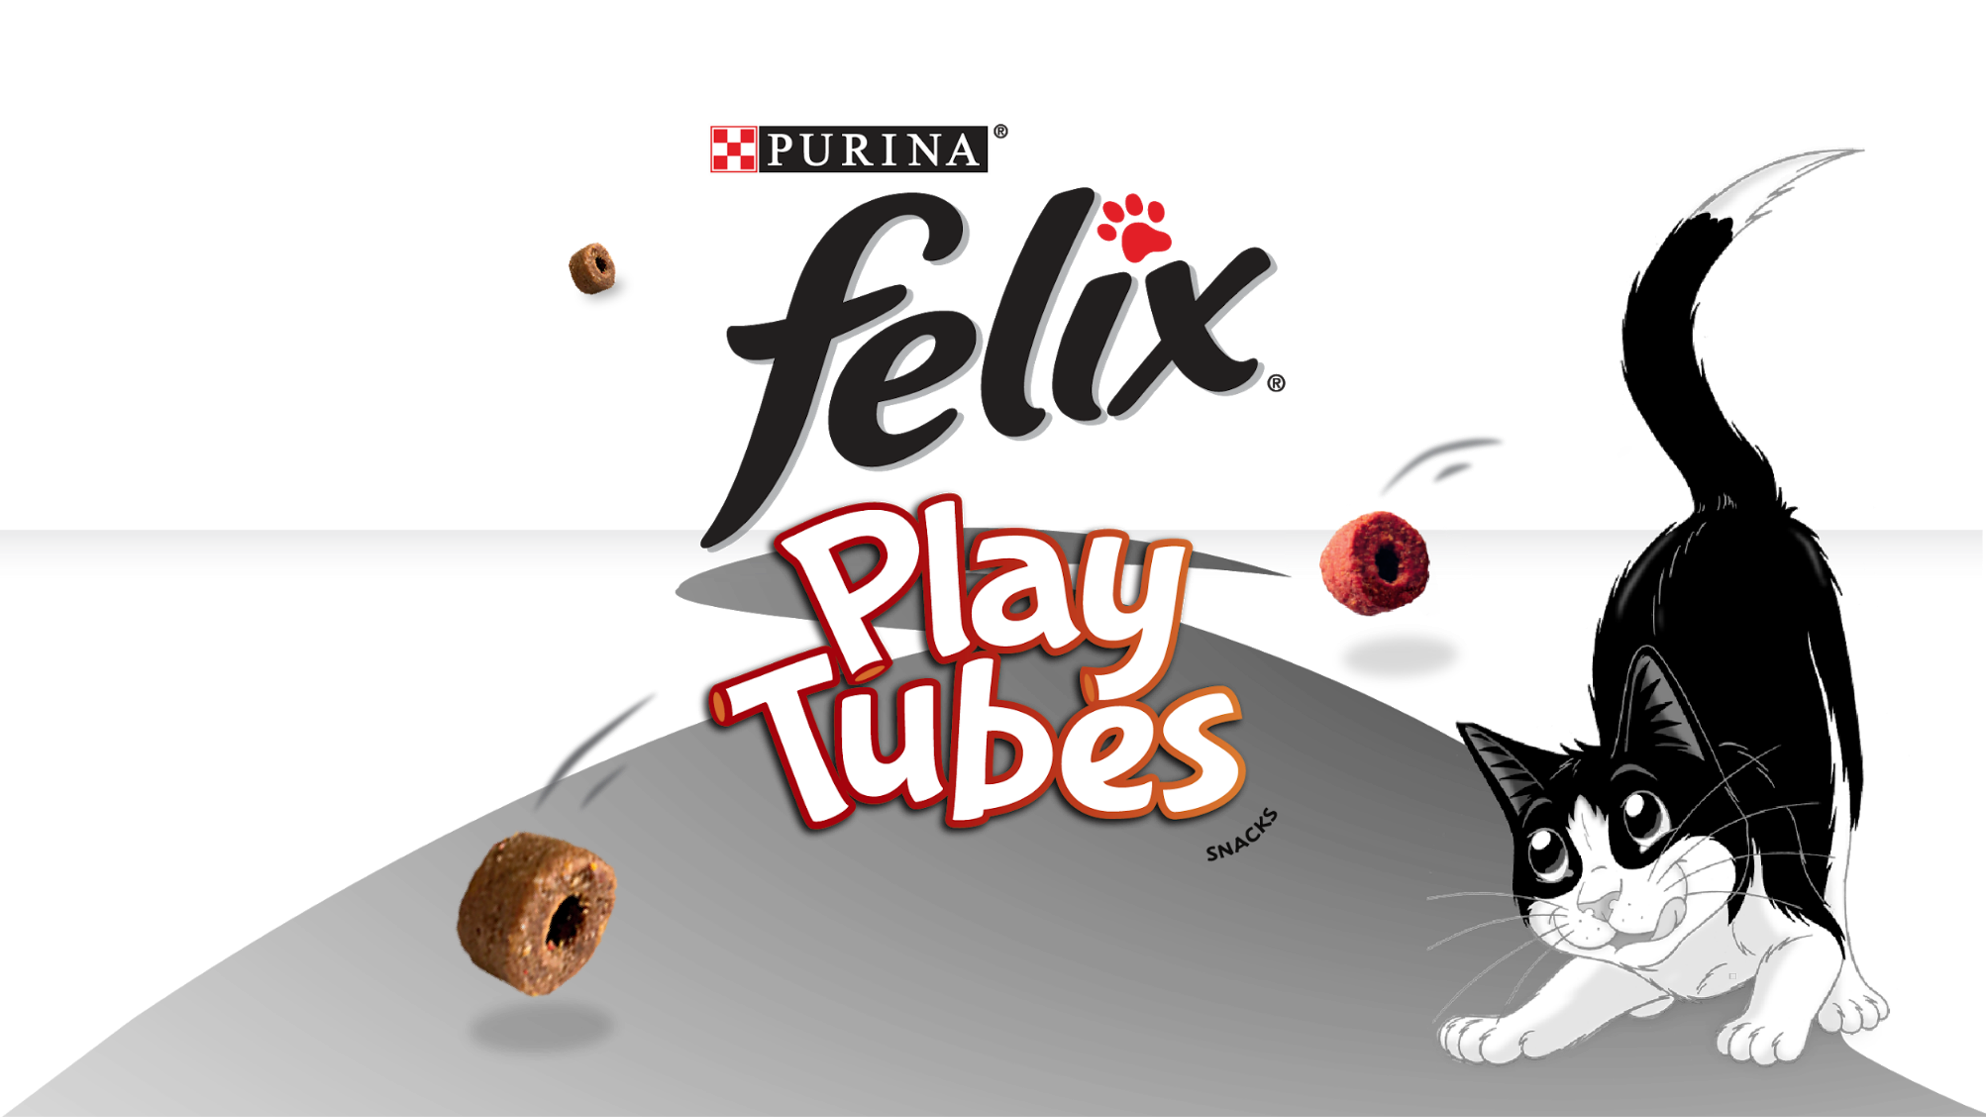 Felix black cat chasing for a Felix Play Tubes snack